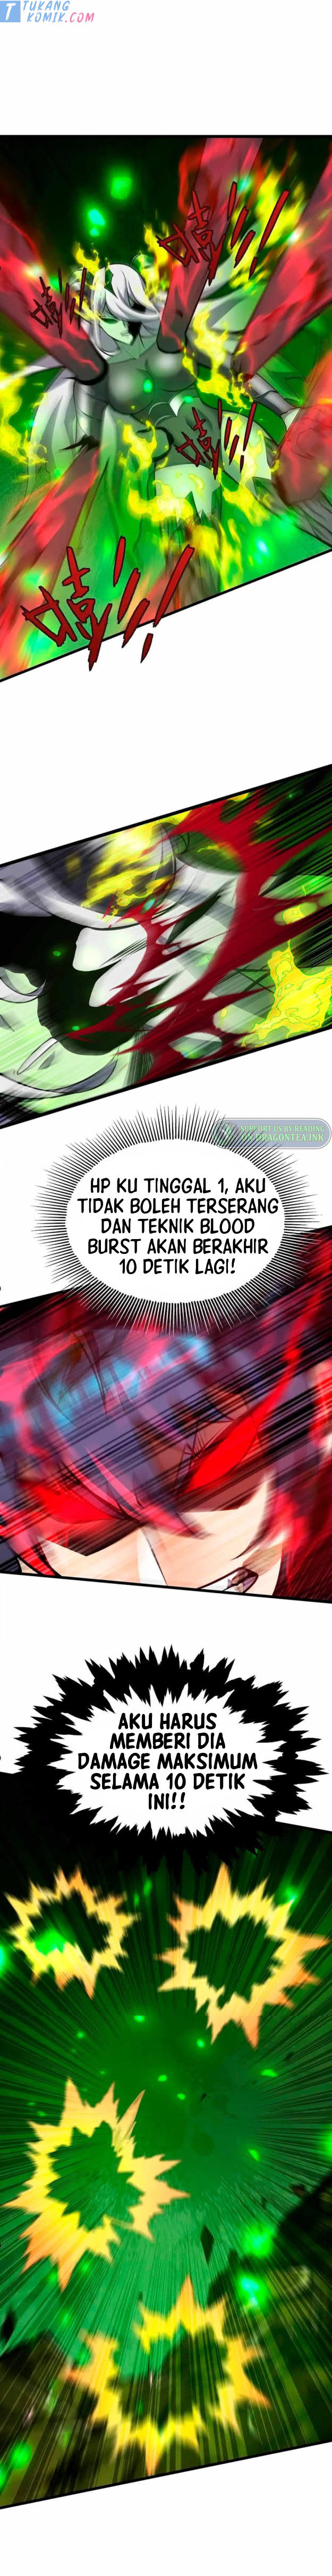 Demon King Cheat System Chapter 28 8